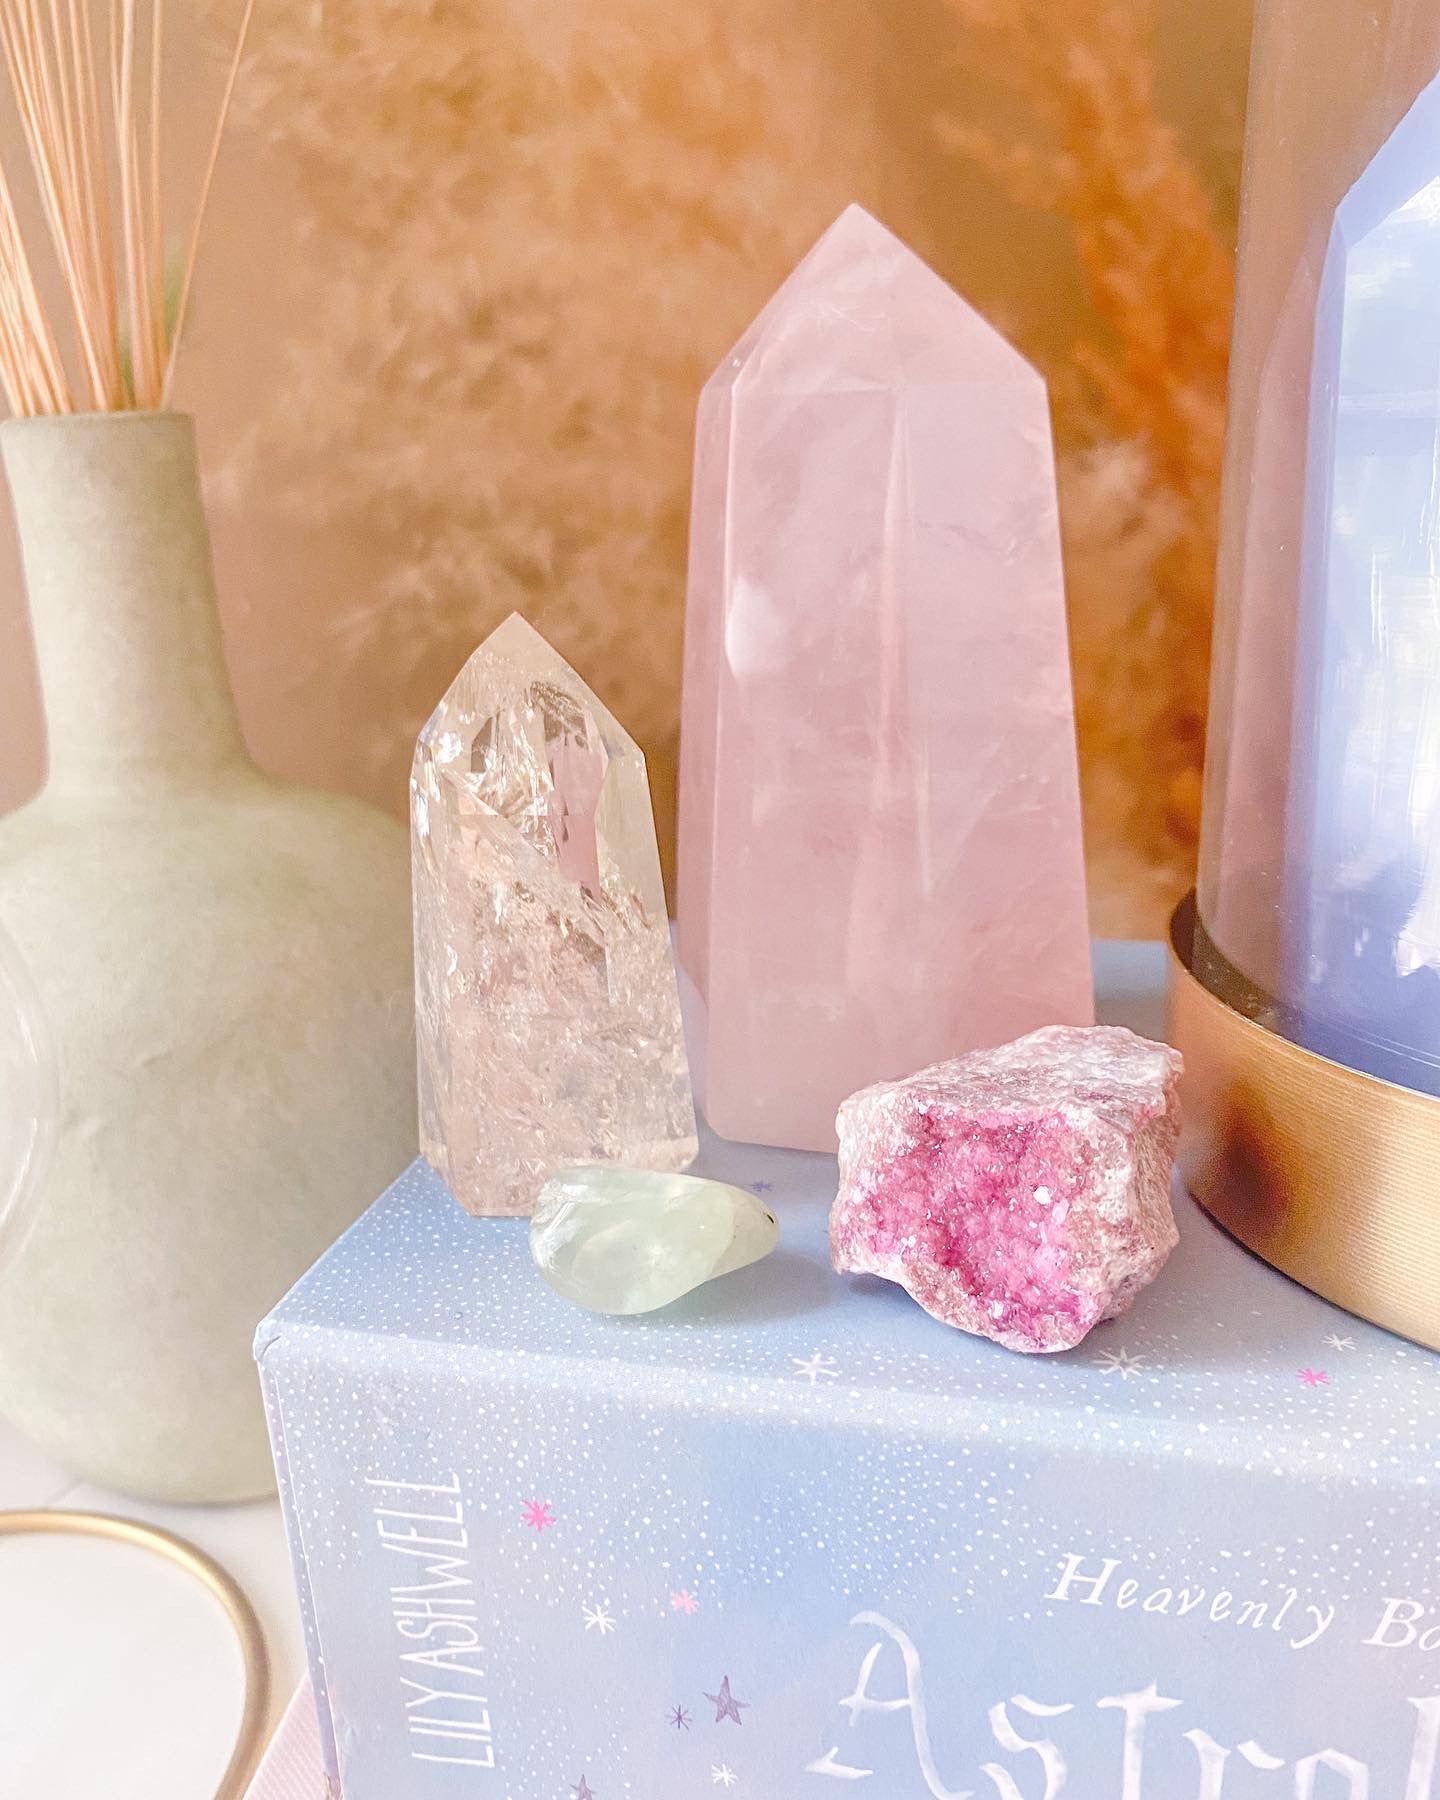 Find Your Soulmate with Crystals